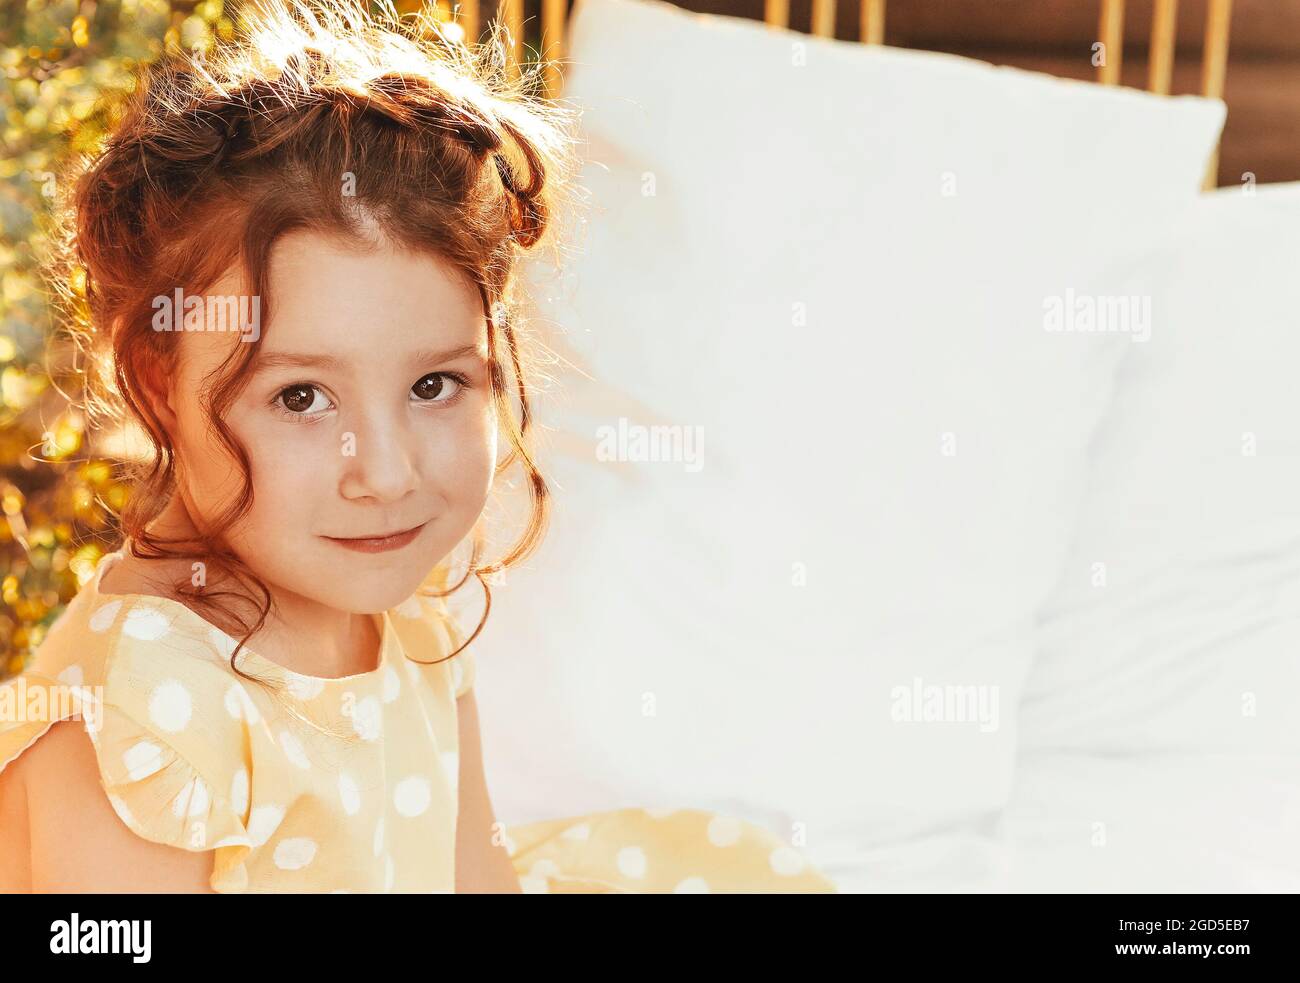 Close up portrait of cute little adorable redhead girl with curly hair with braid wearing yellow dotted dress looking at camera while playing in natur Stock Photo